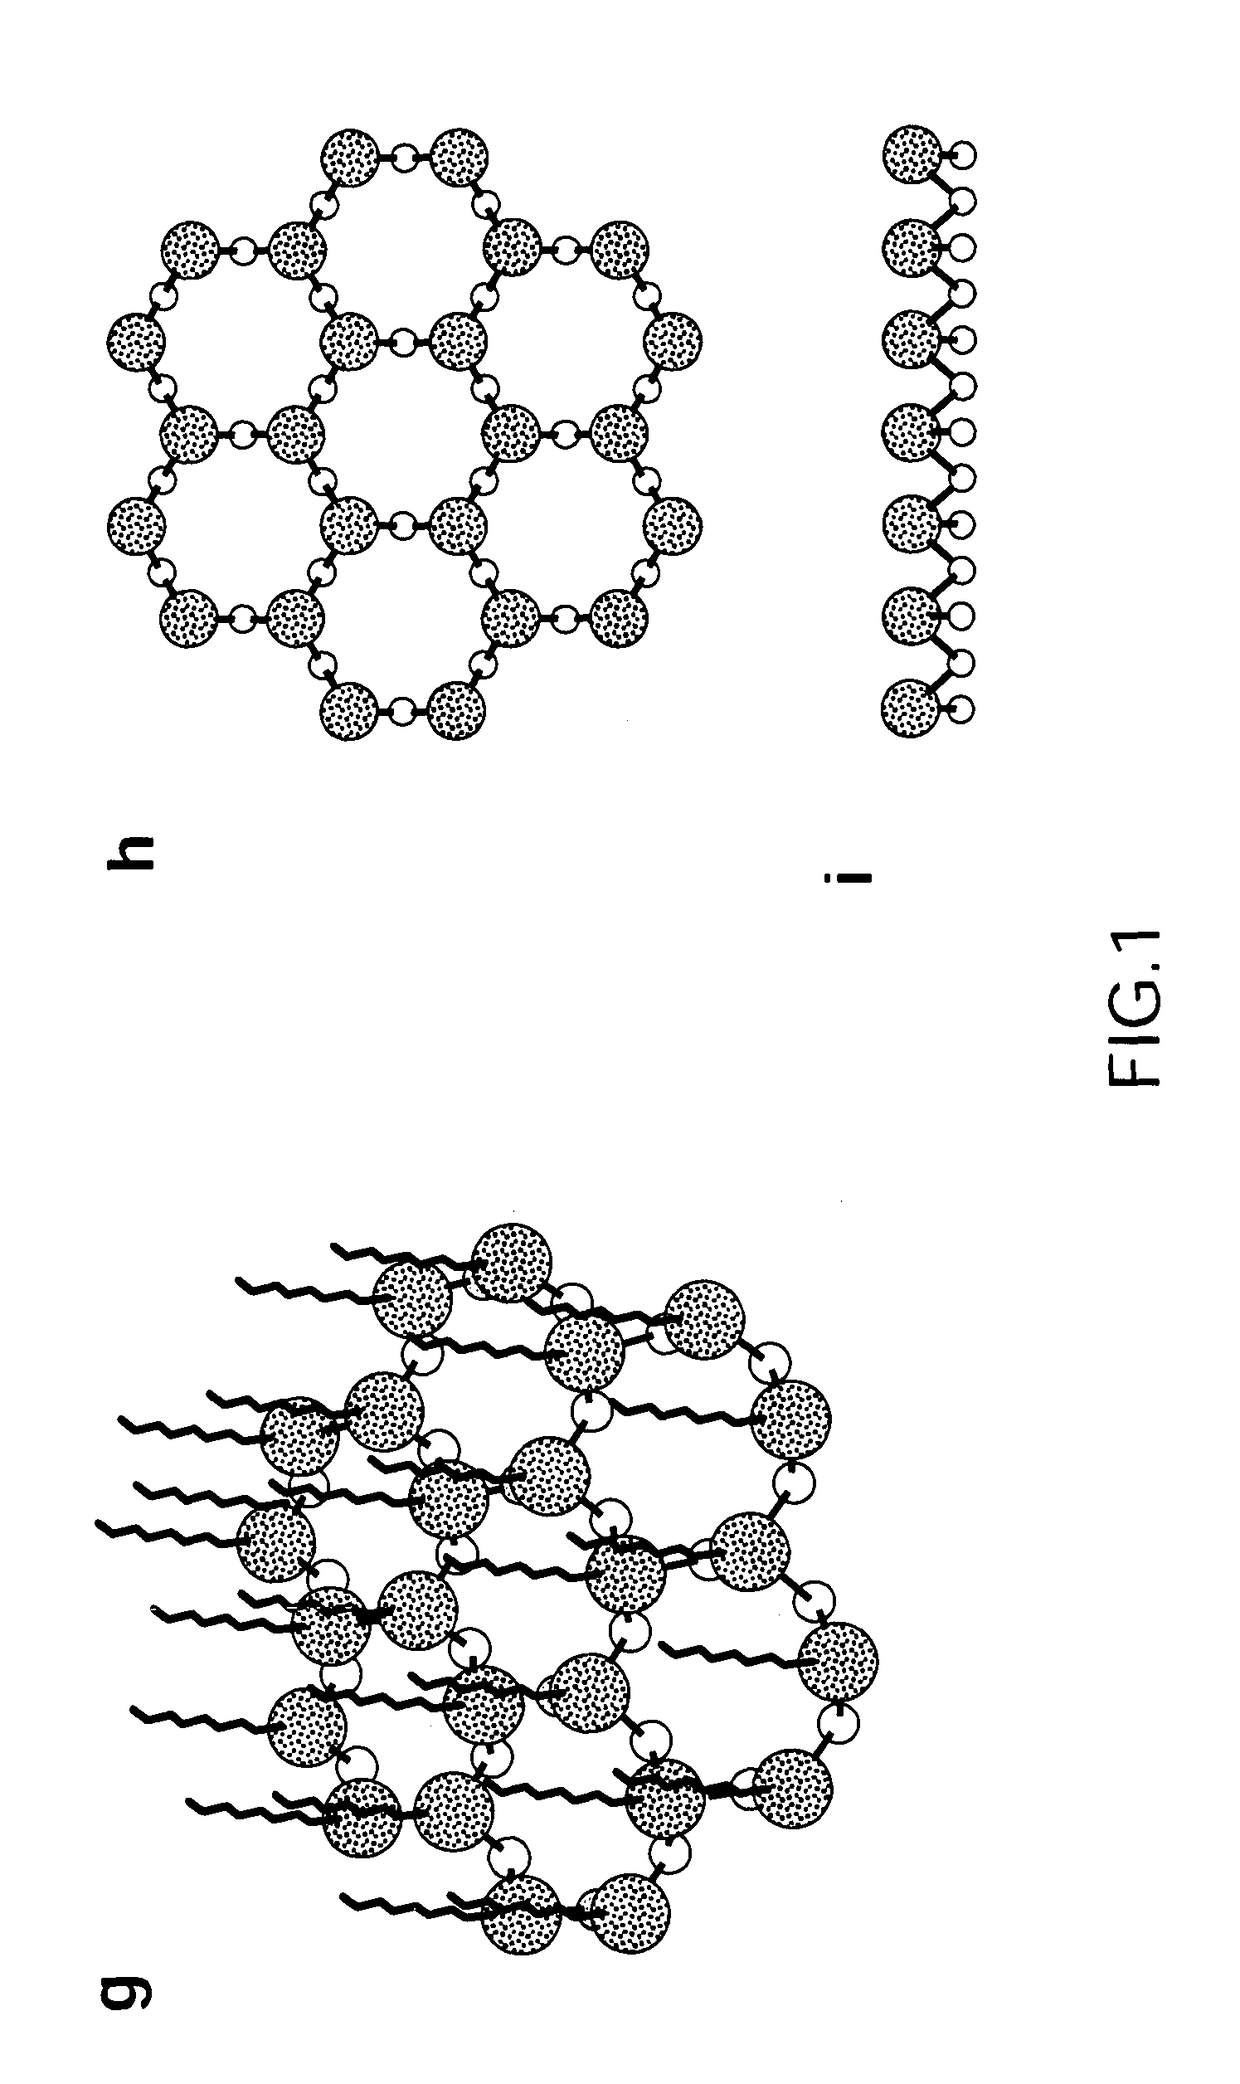 Two-dimensional polymeric structures and method for producing thereof